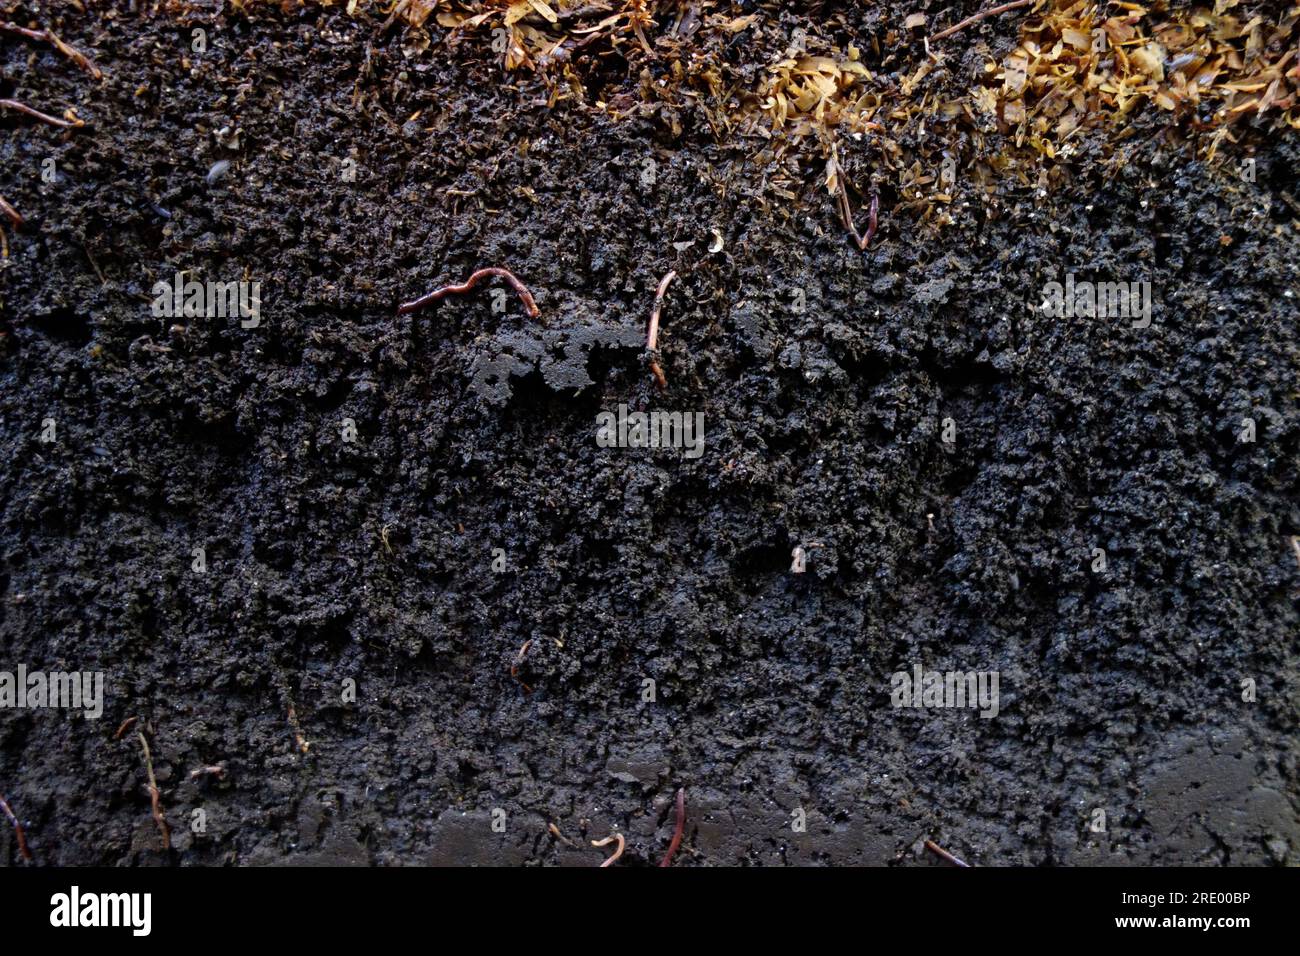 Vermicompost - finished worm compost soil with compost worms (Eisenia Fetida) Stock Photo